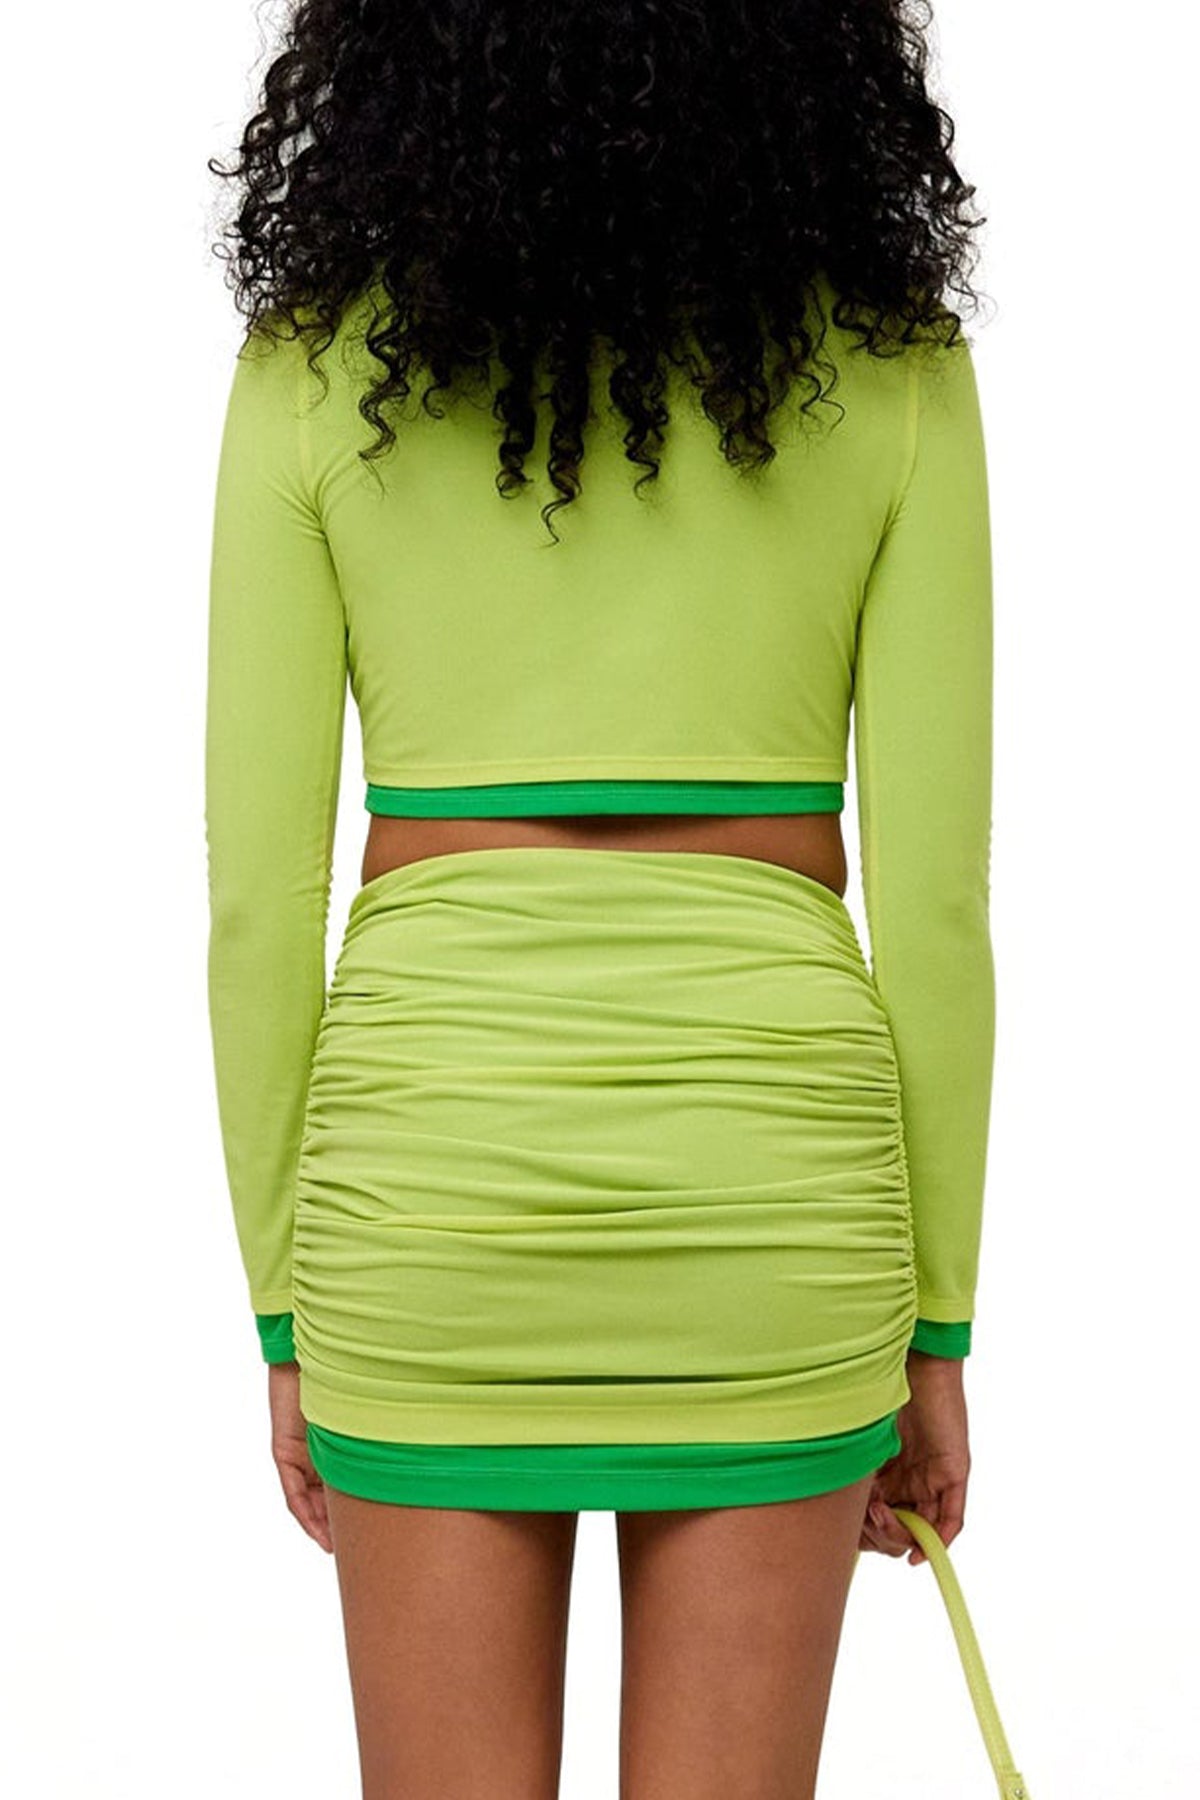 Mesh Mimsy Top in Lime - shop-olivia.com